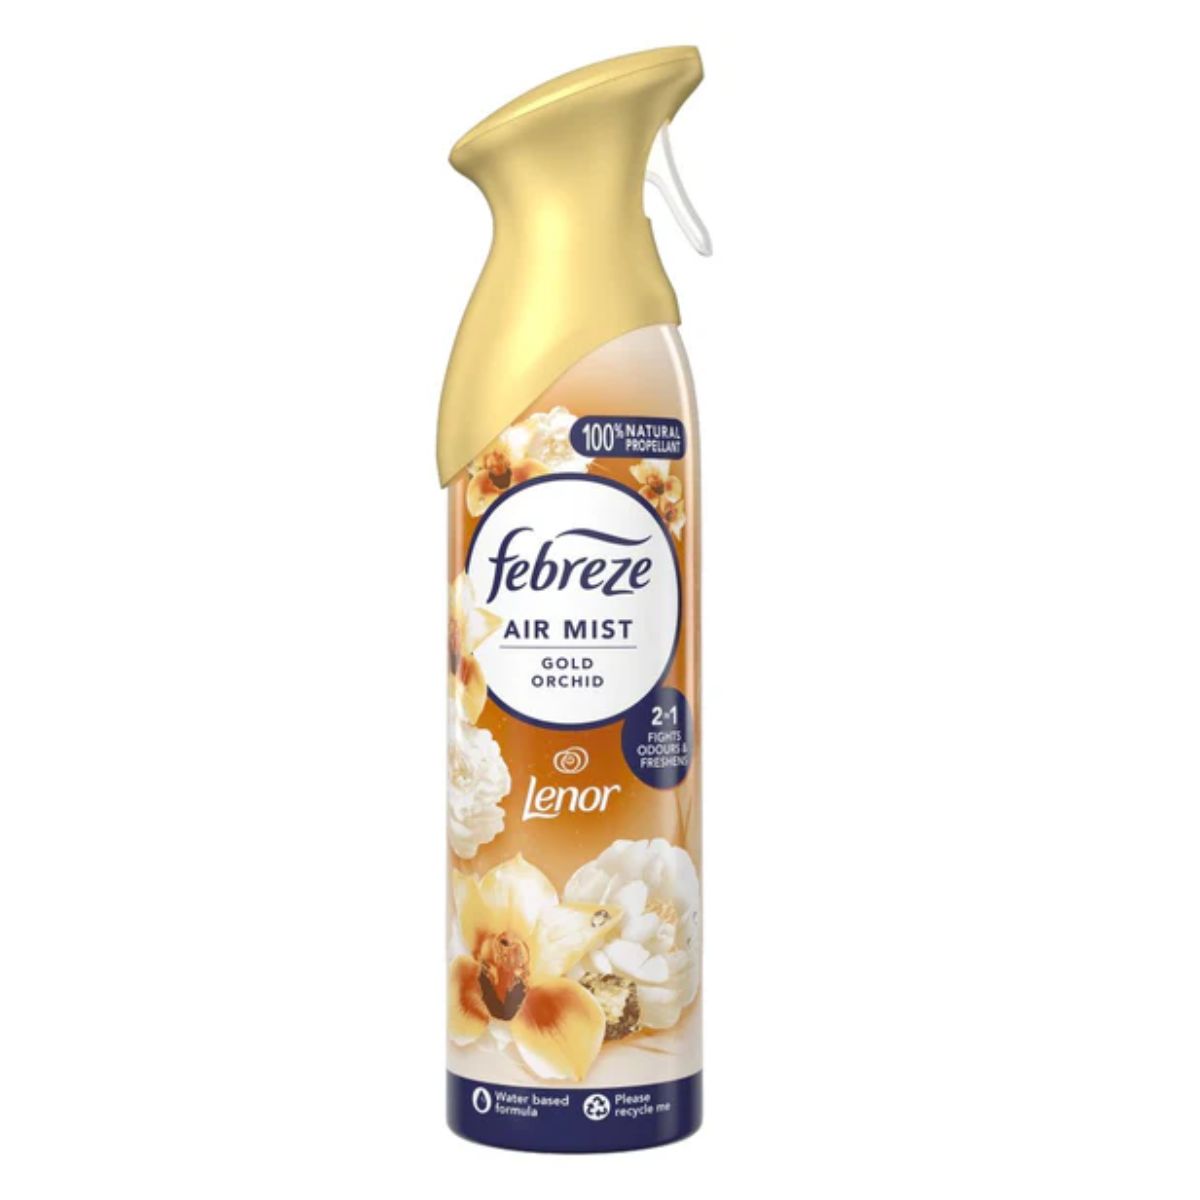 A Febreze - Air Freshener Spray Gold Orchid - 185ml can with a gold and white label, featuring the luxurious scent "Febreze Gold Orchid" and branding for Lenor. The can has a trigger-style spray top that not only emits a delightful fragrance but also effectively eliminates odors.